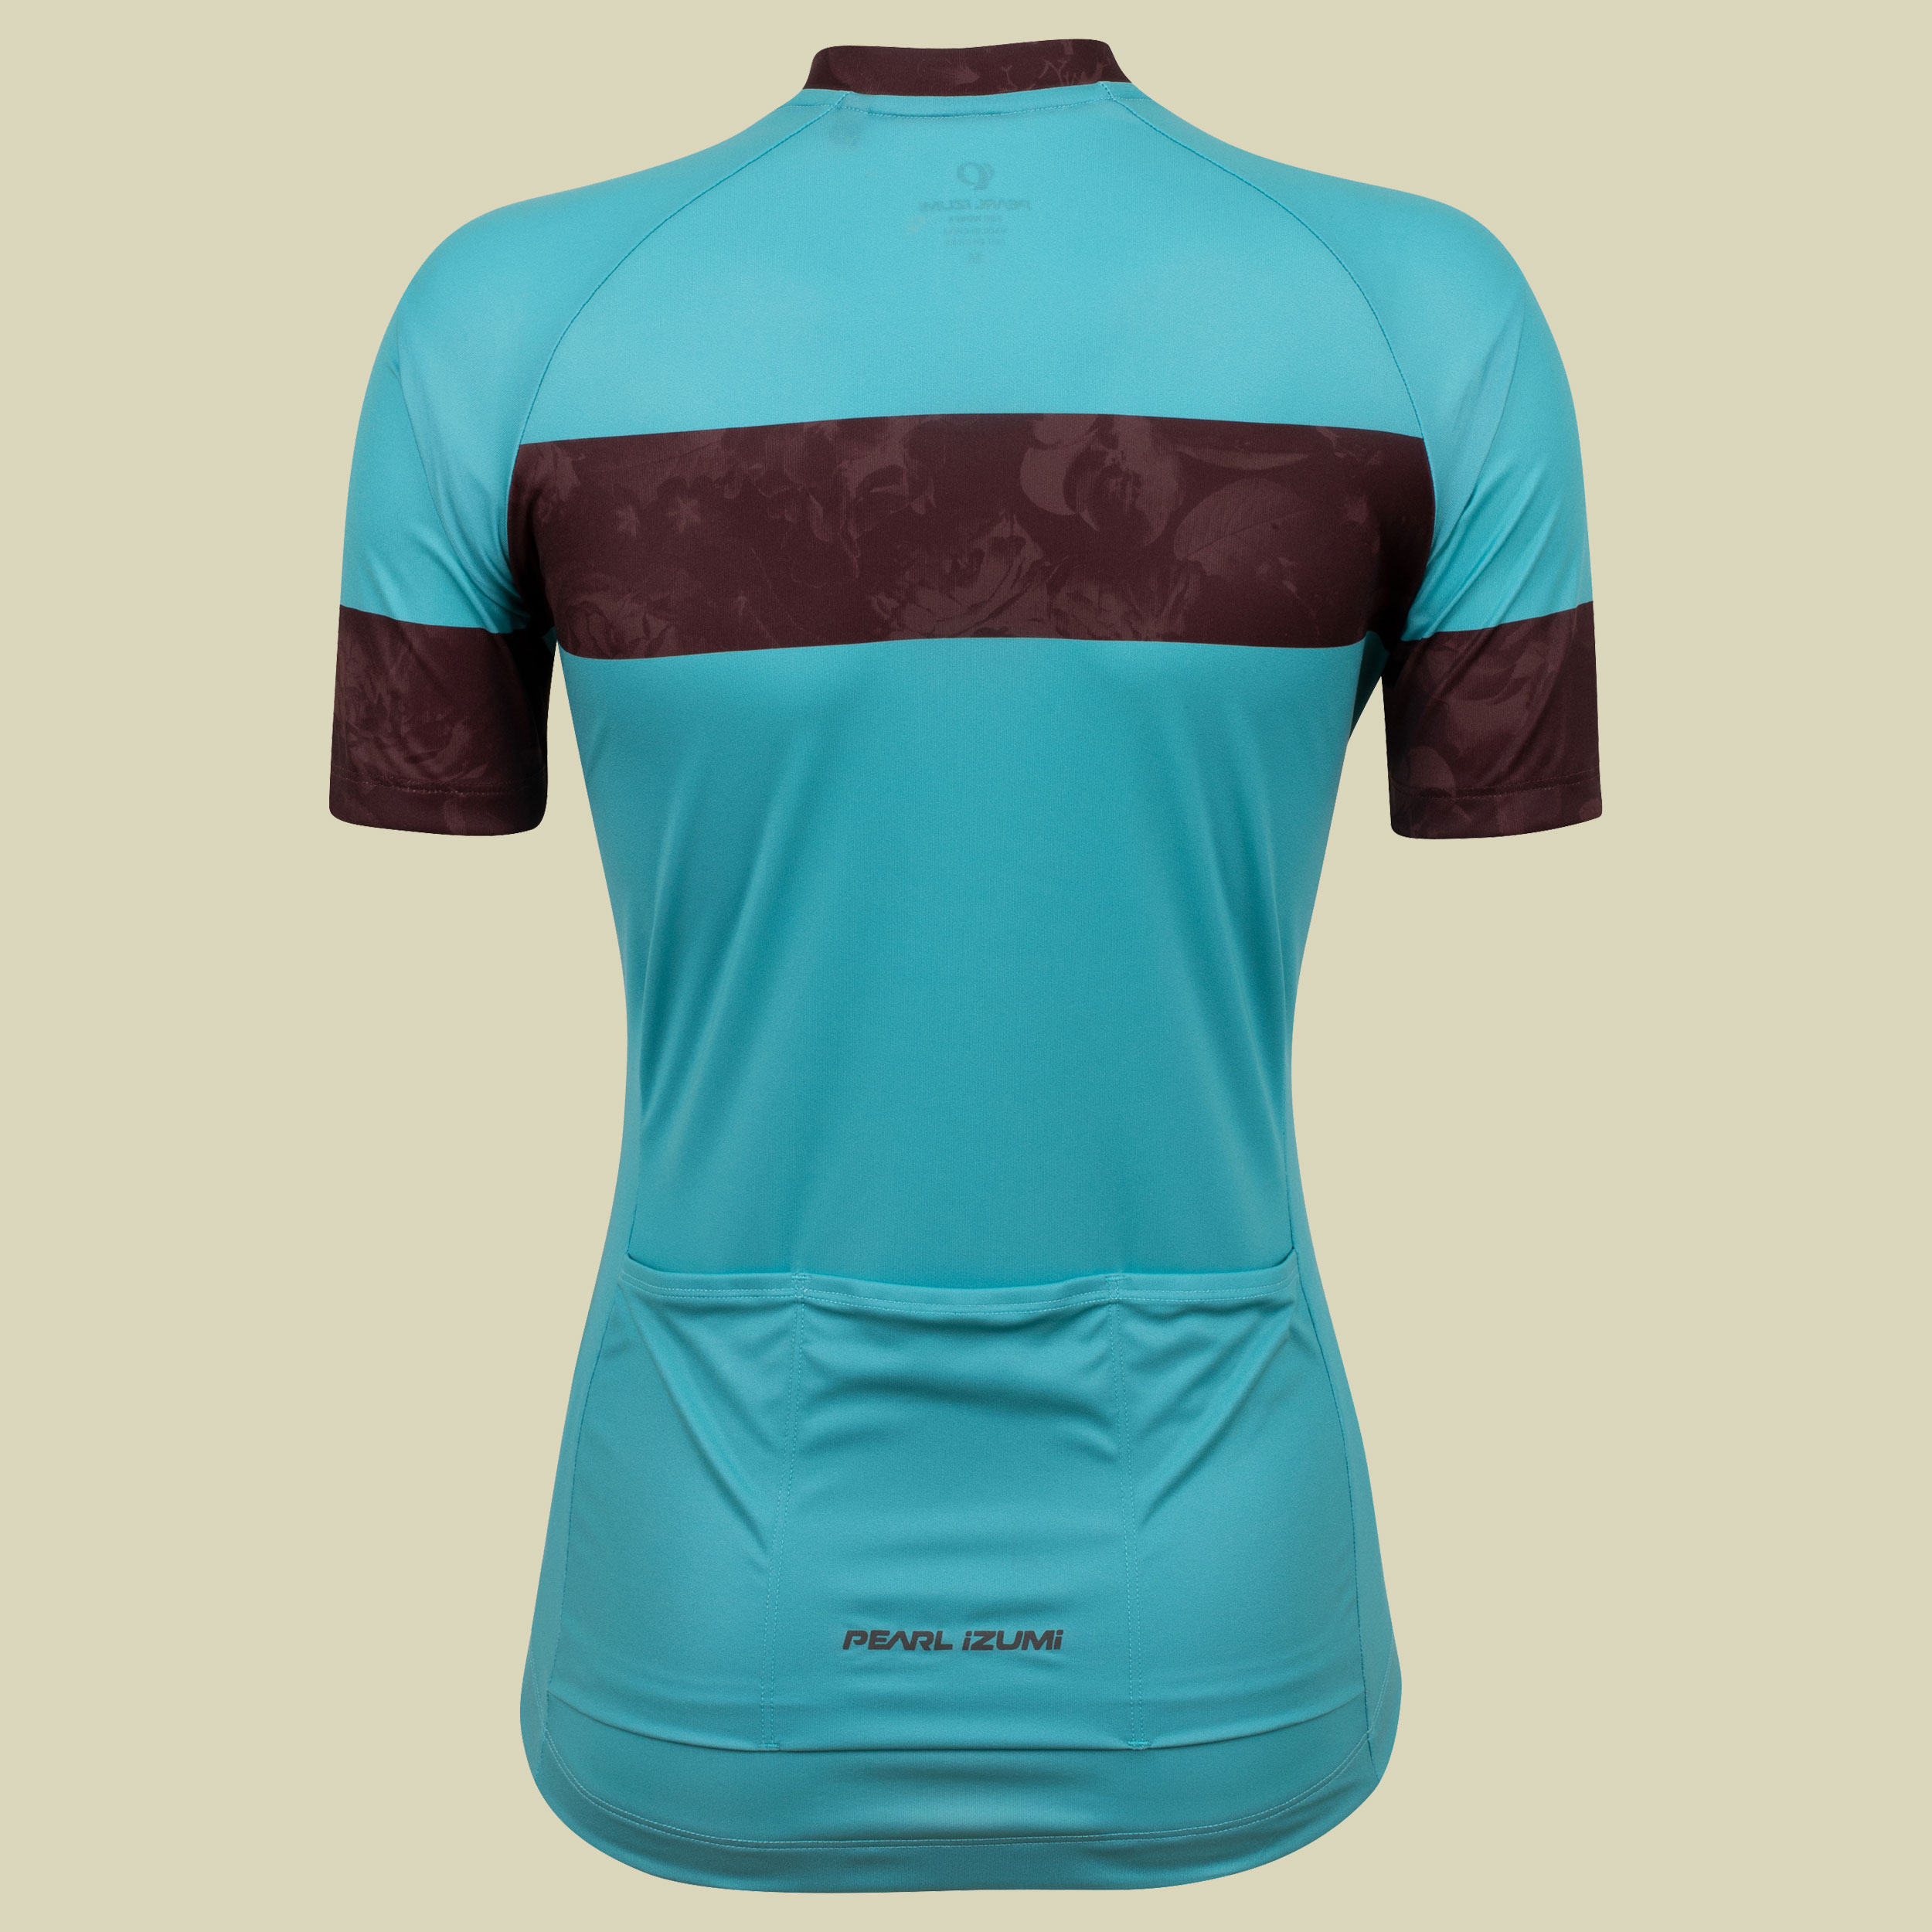 Attack Jersey Women Größe S Farbe mystic blue/cacao floral